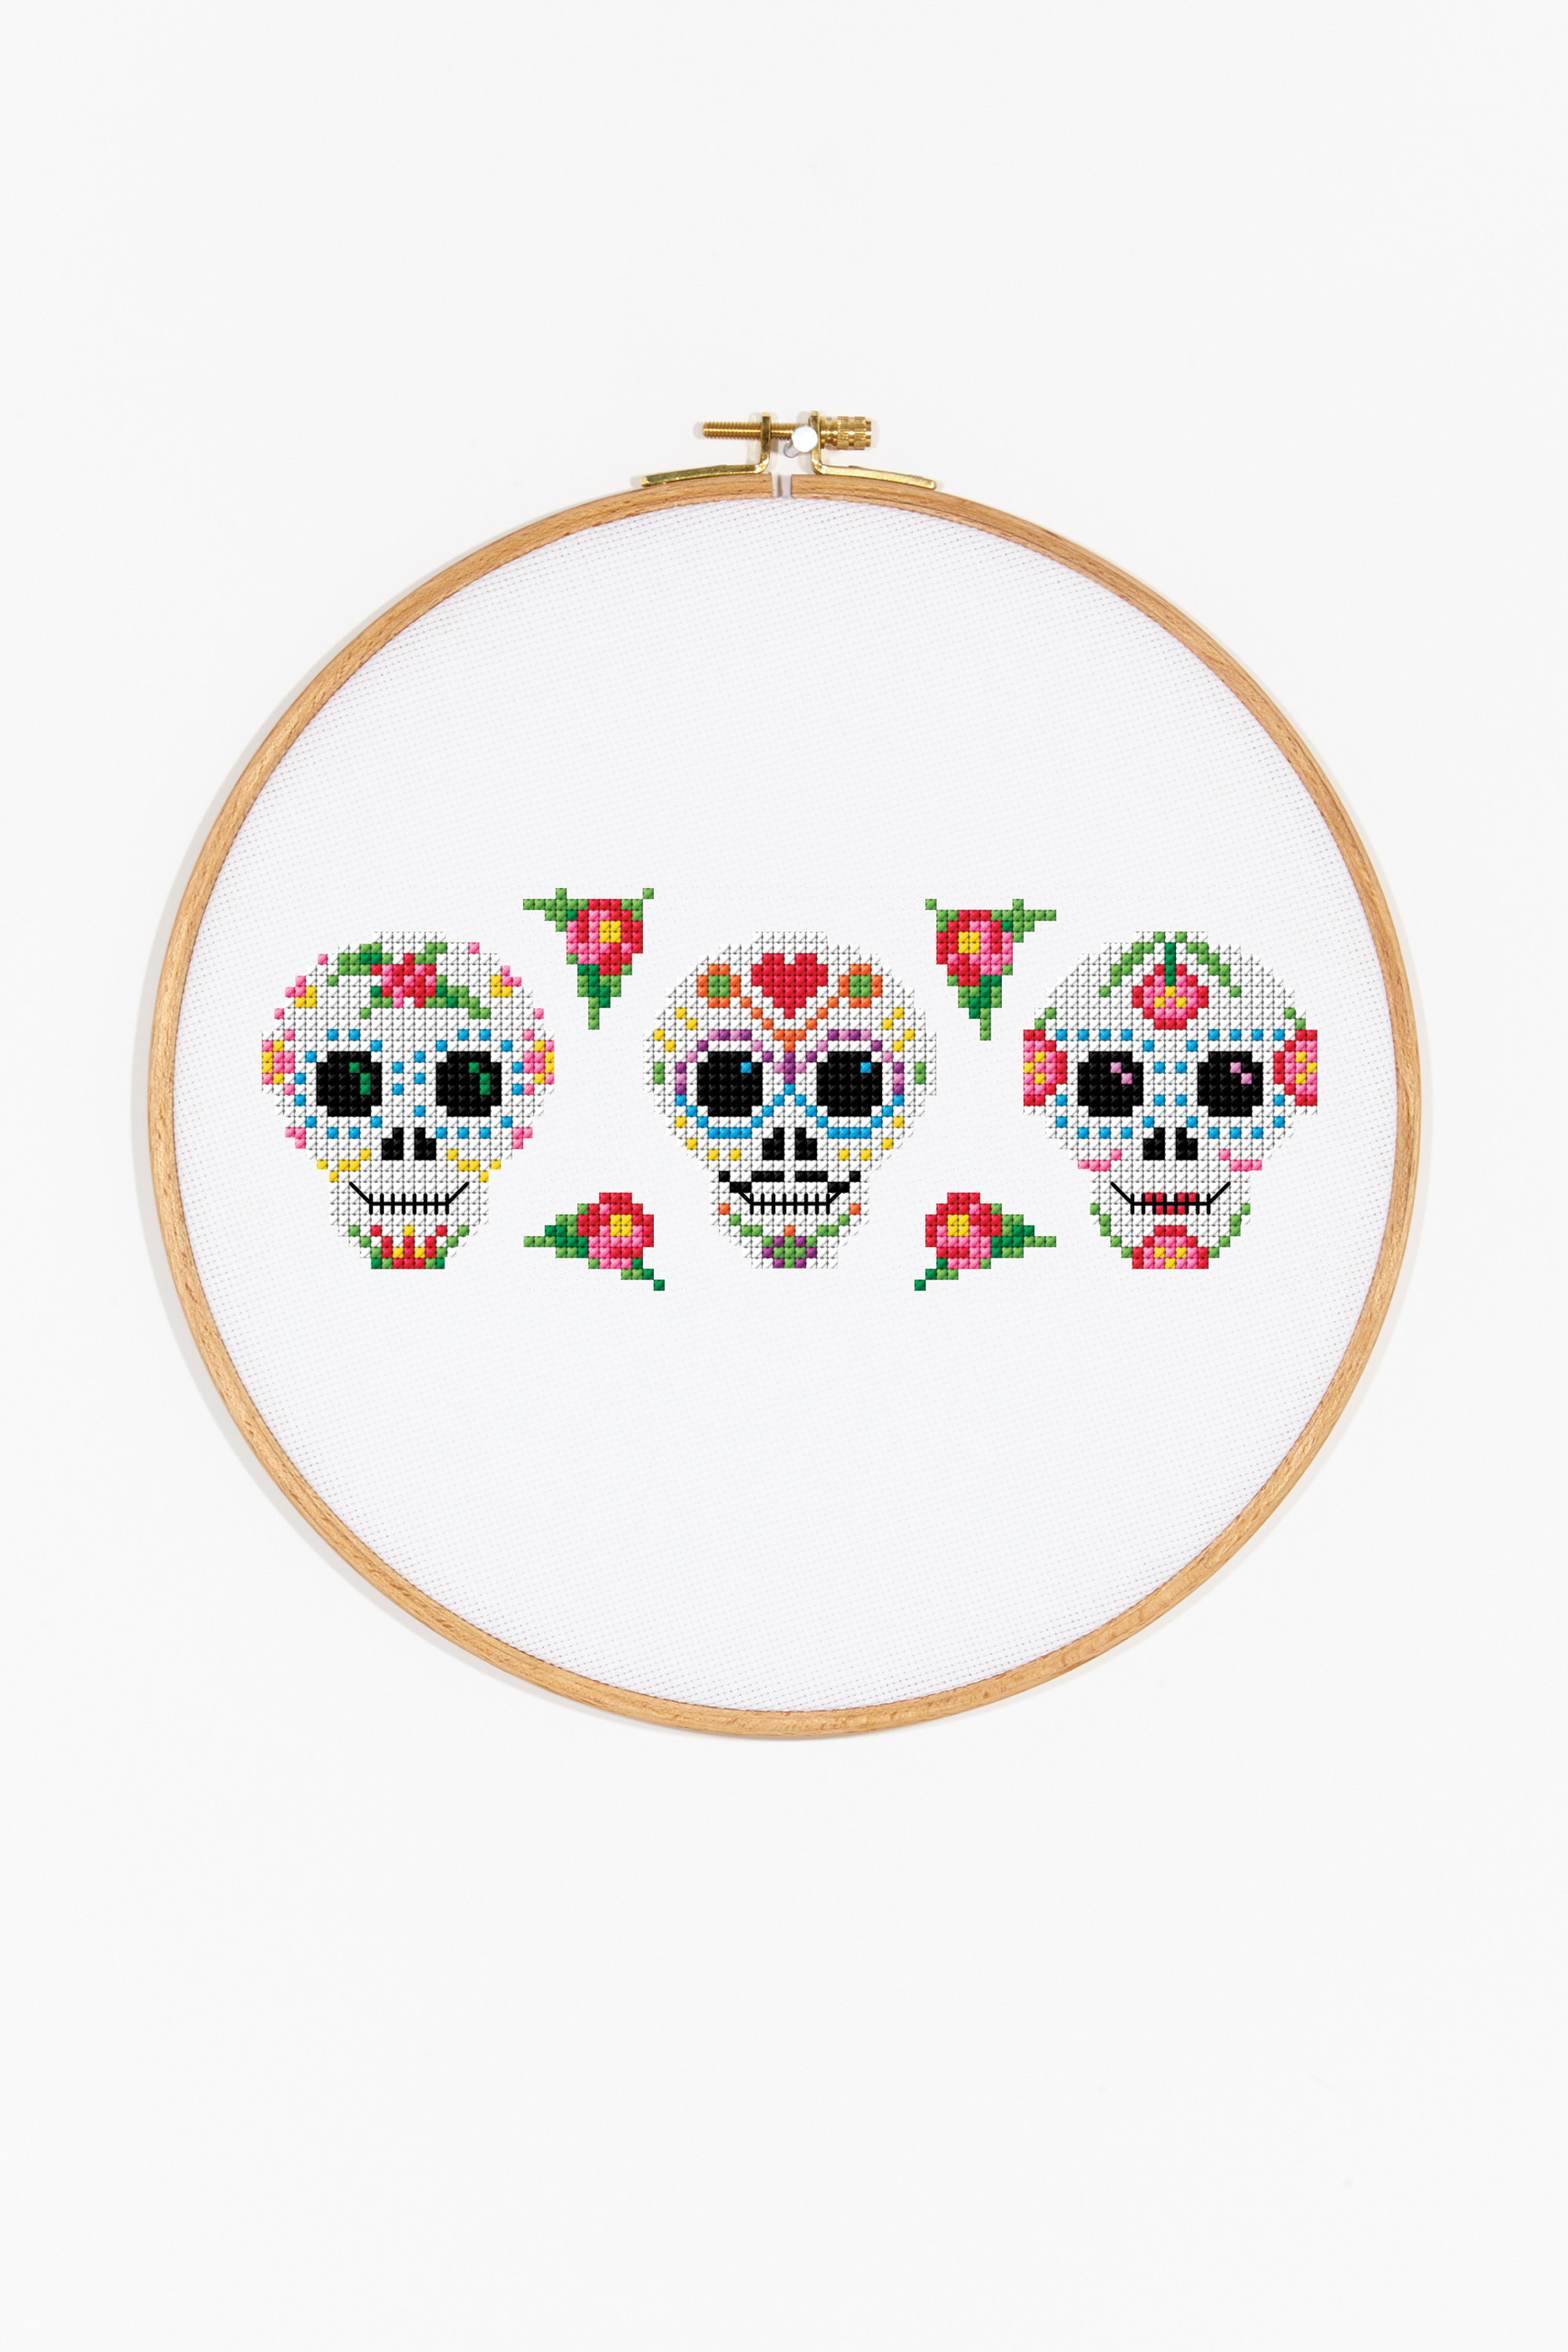 Day Of The Dead Embroidery Patterns Mexican Day Of The Dead Pattern Free Cross Stitch Patterns Dmc